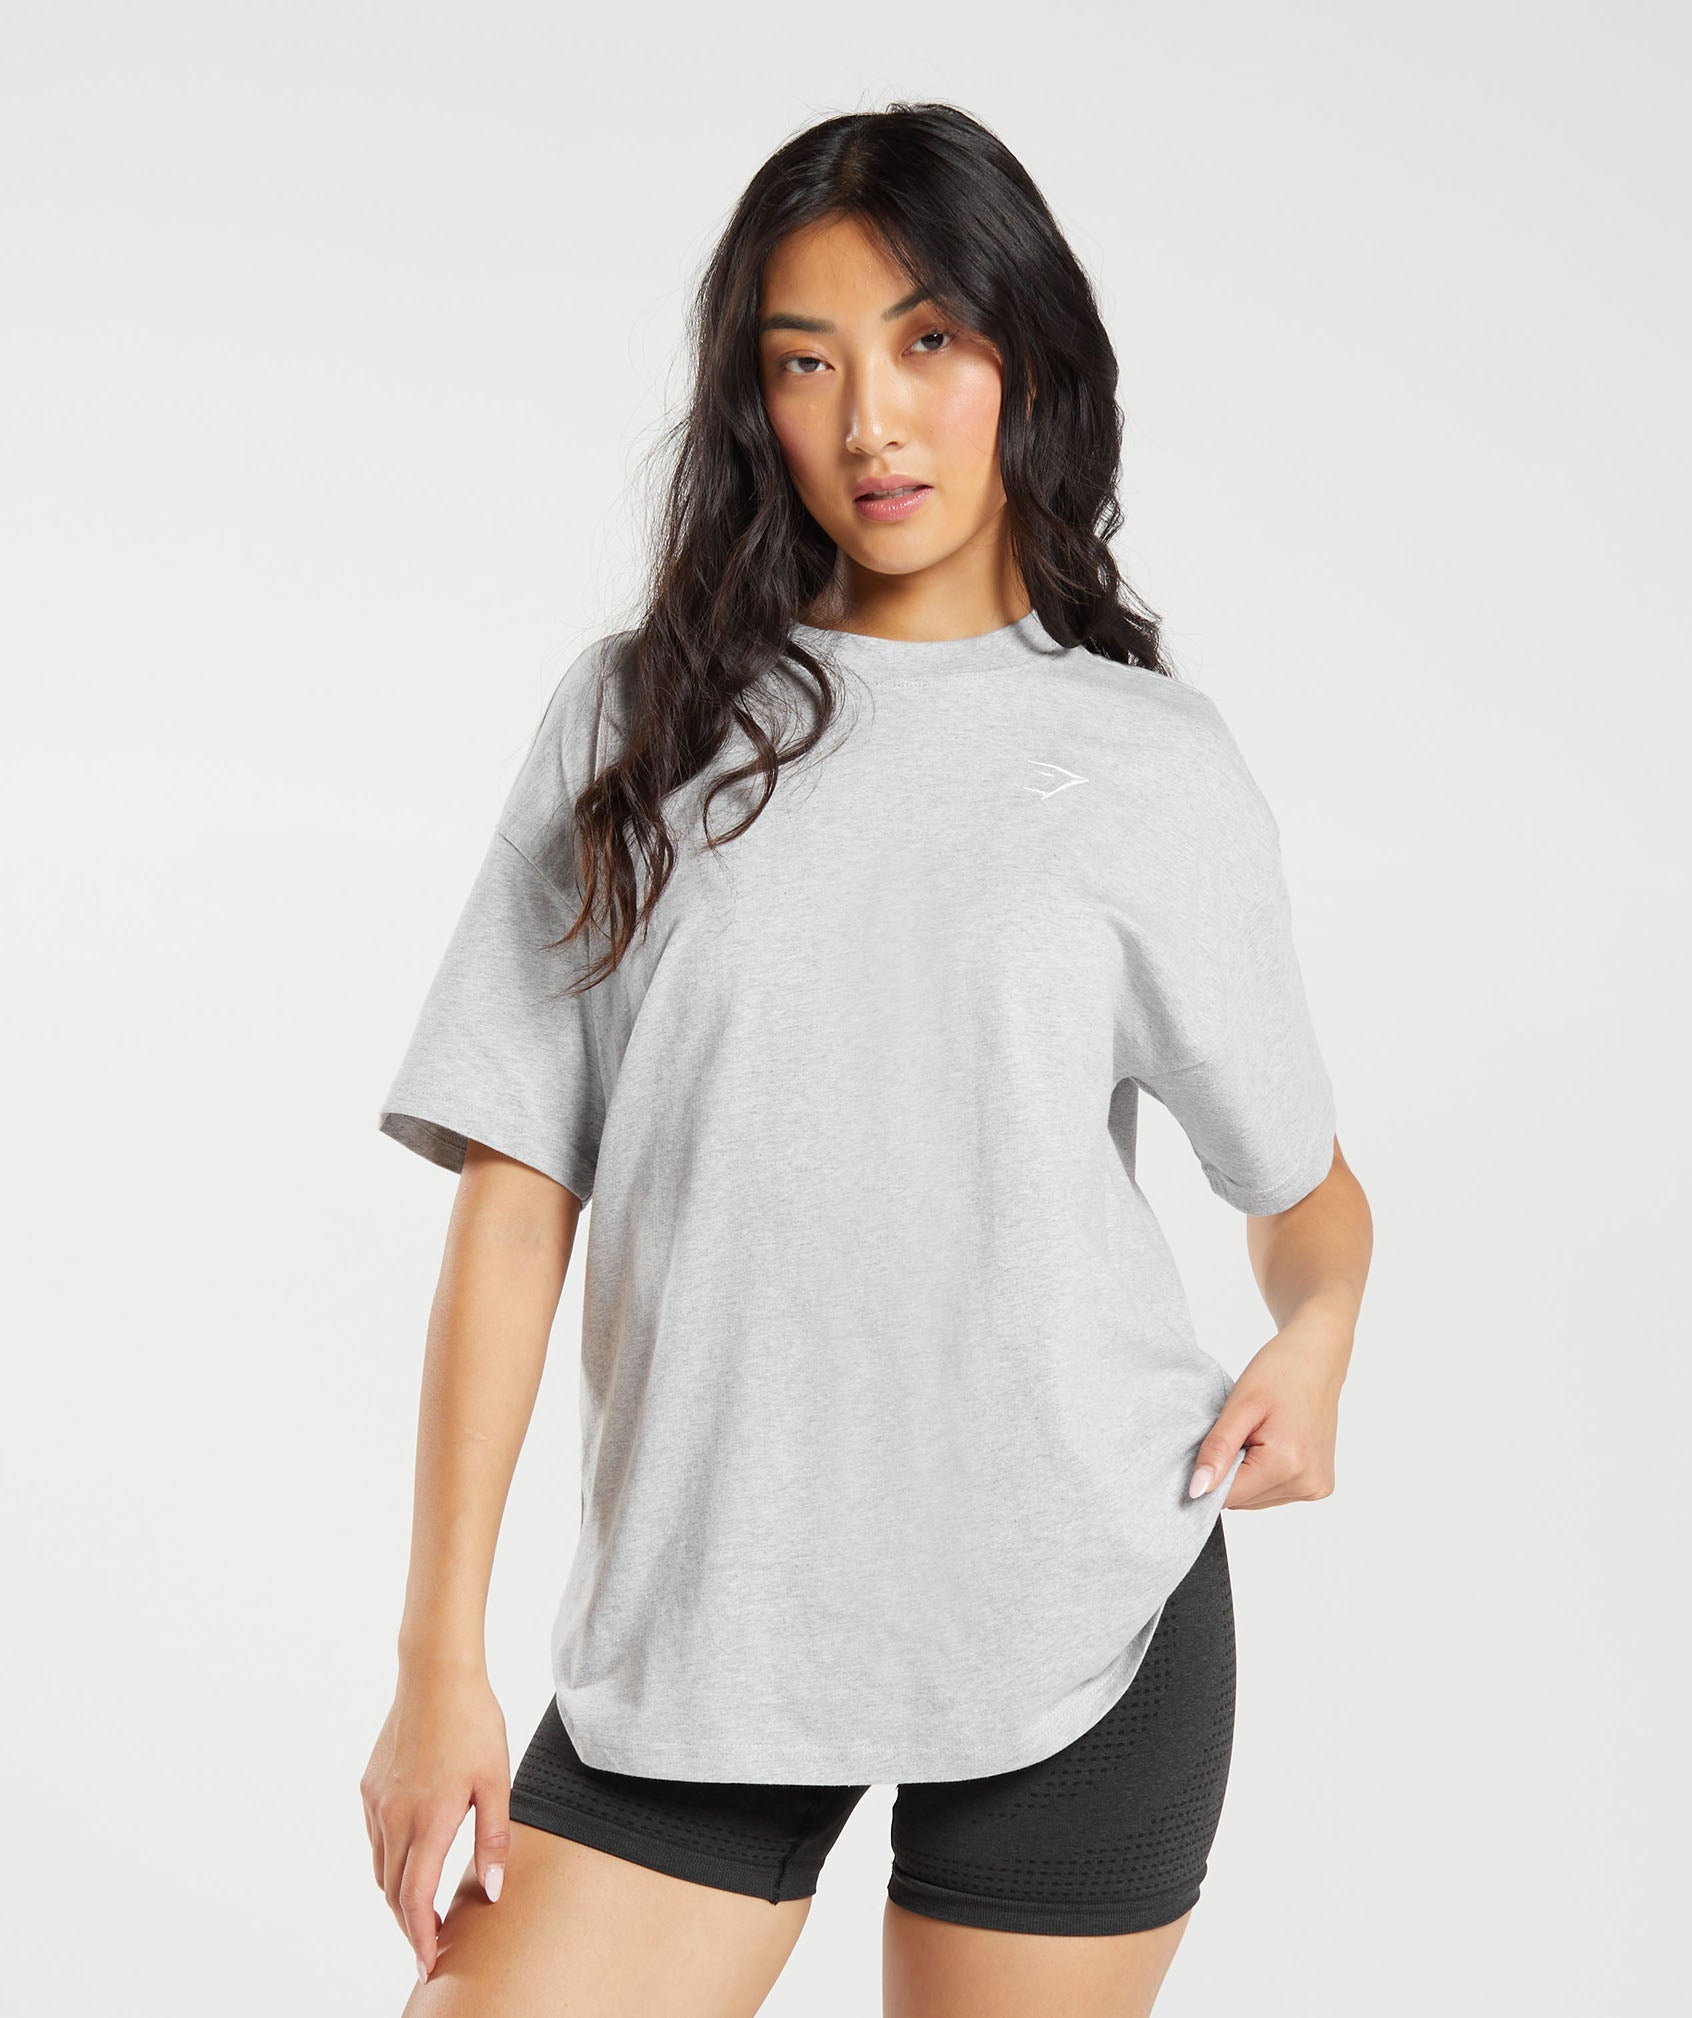 Training Oversized T-Shirt in Light Grey Marl is out of stock